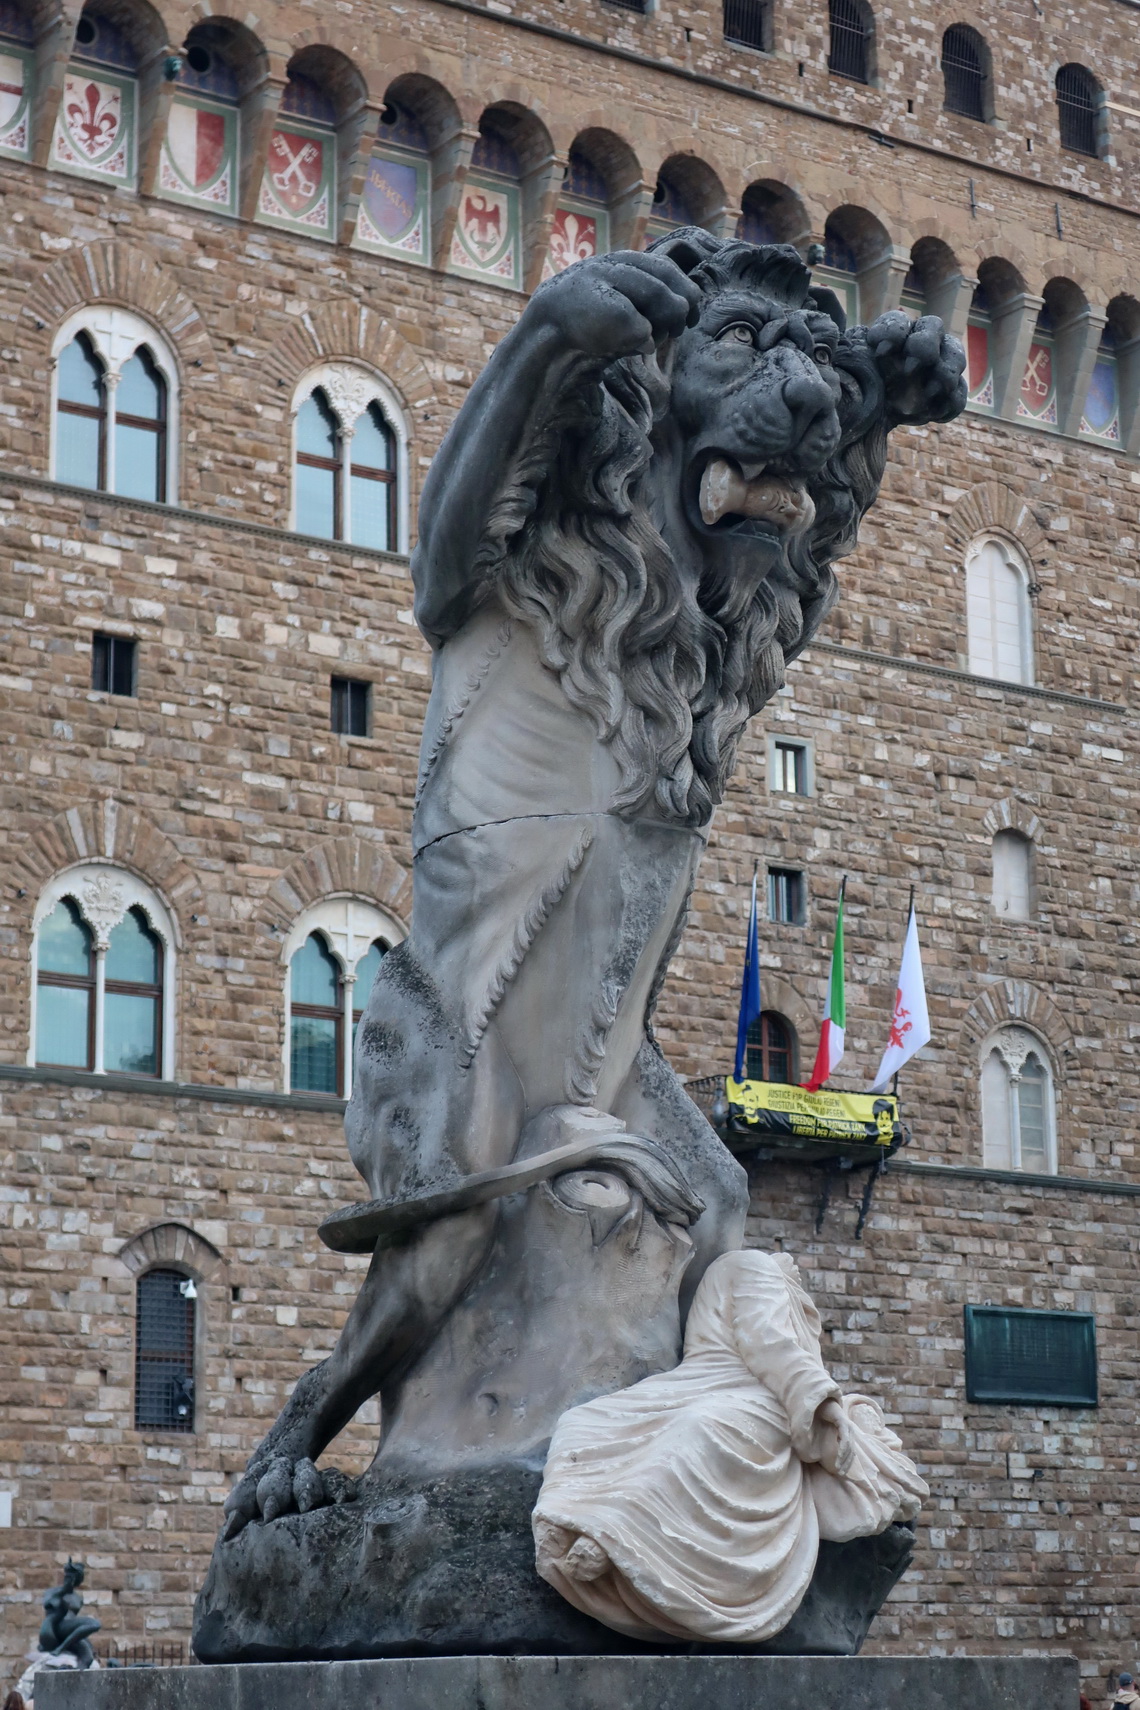 Lion with a human head in its mouth on Piazza delle Sigoria